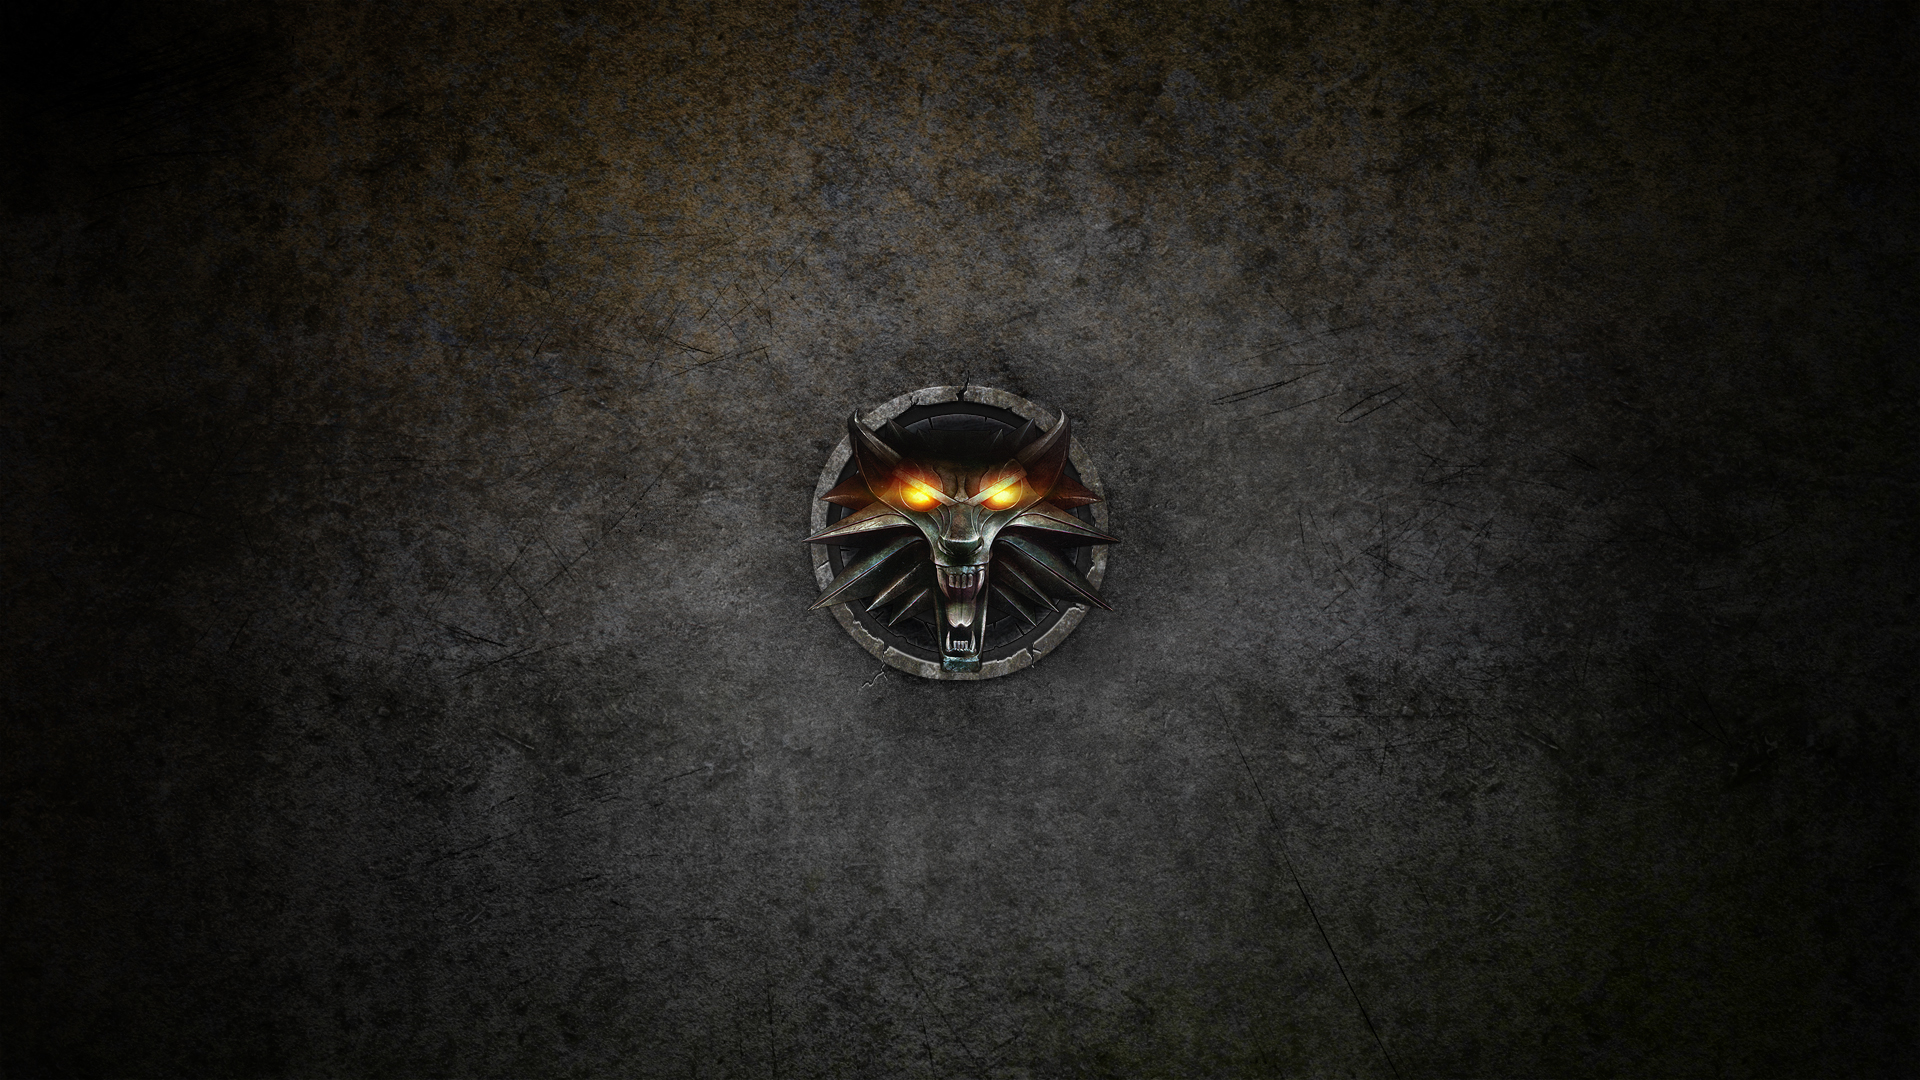 The Witcher wolf head medallion pendant necklace wallpaper The Witcher 1920x1080